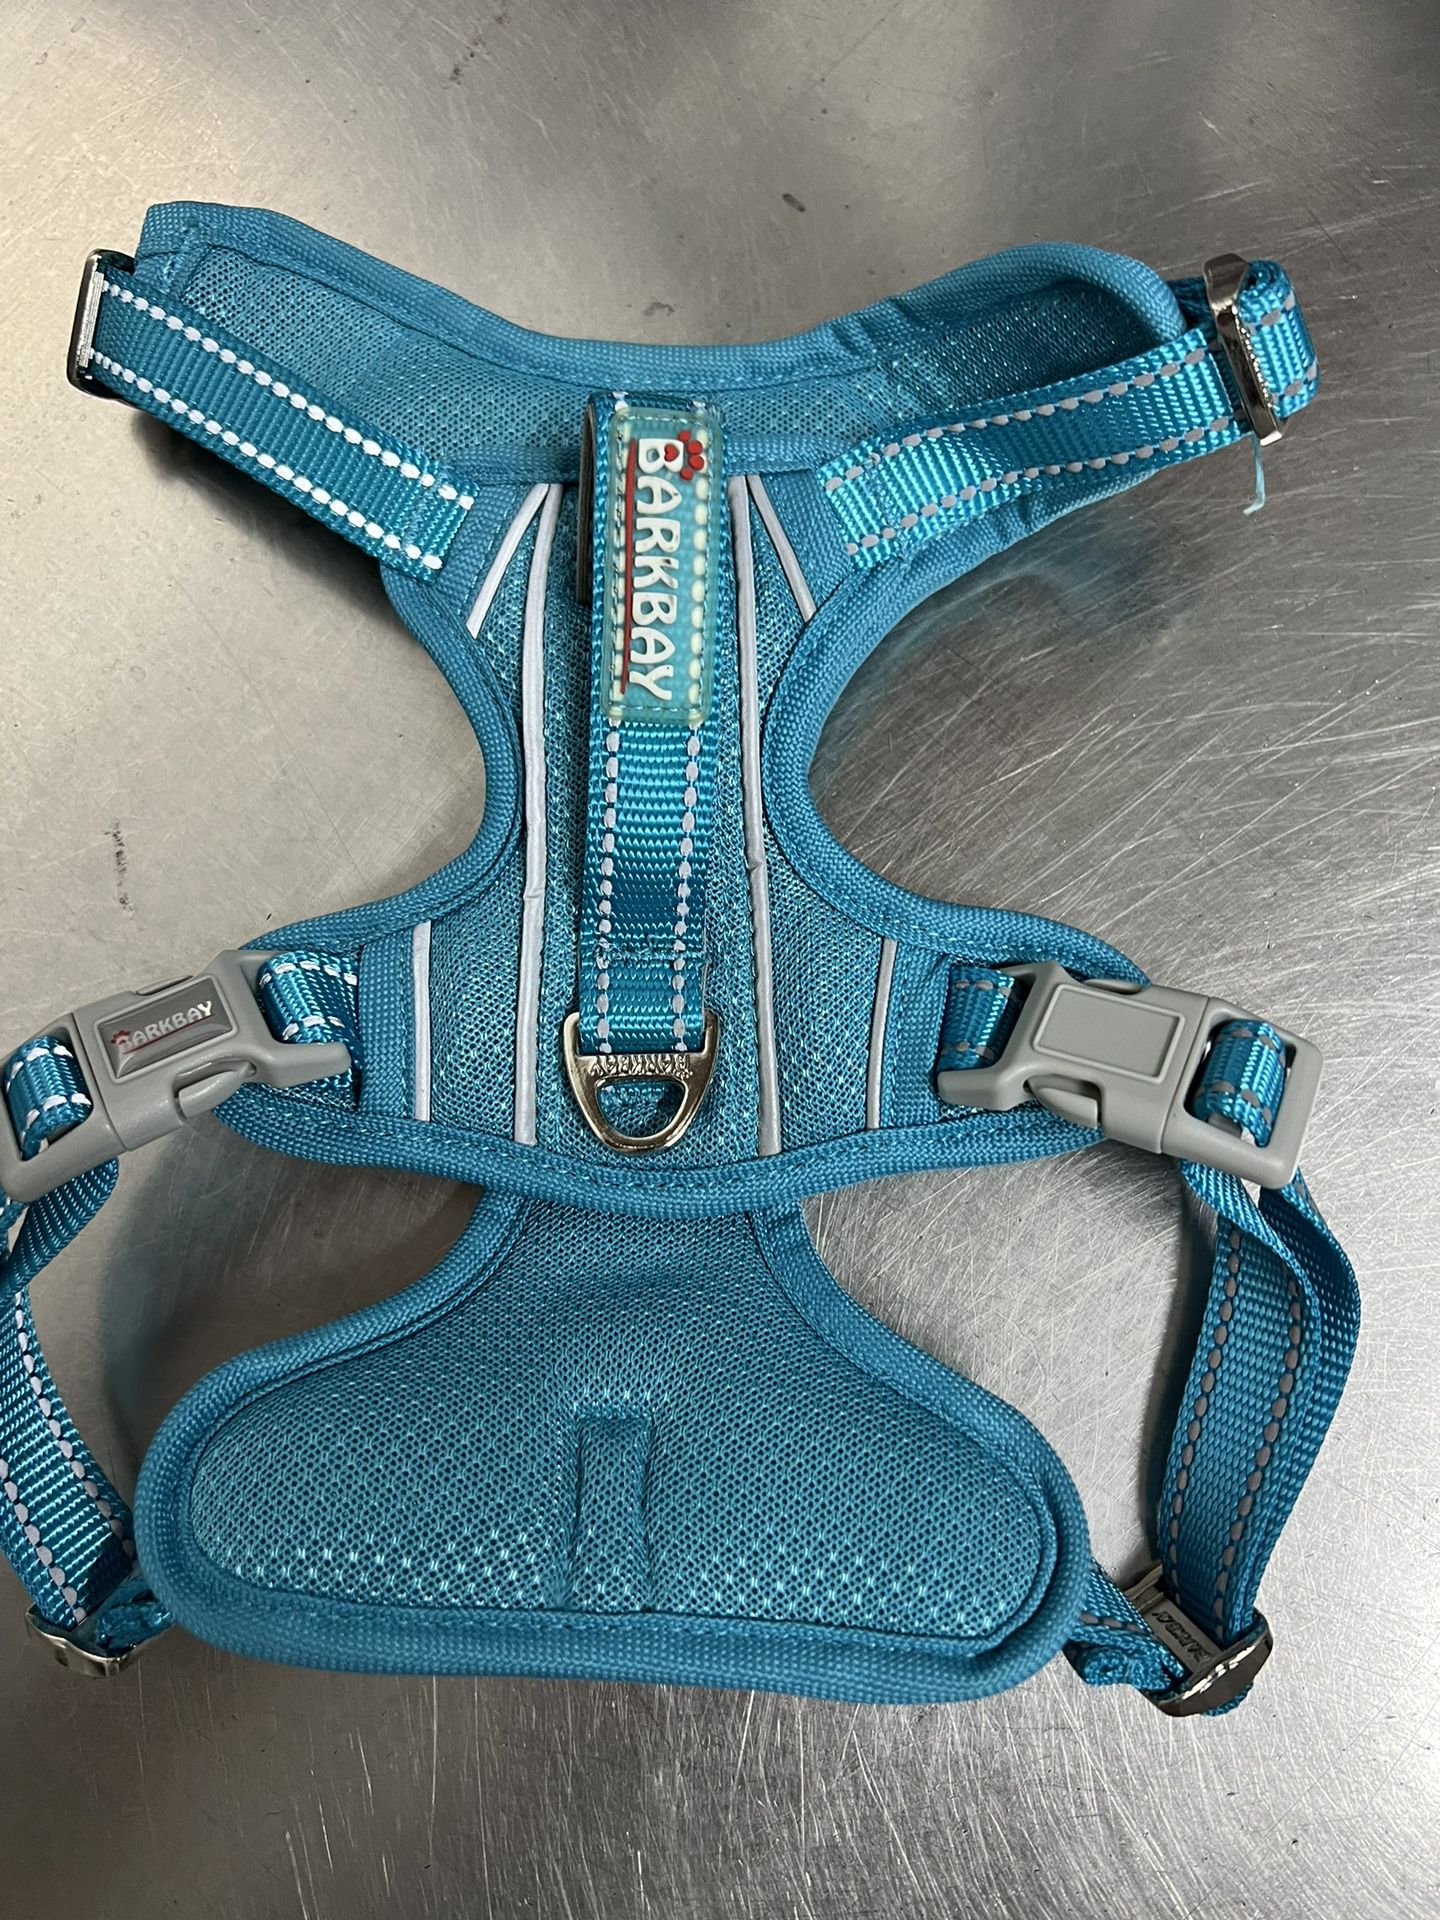 Barkbay Blue No Pull Dog Step in Reflective Harness Front Clip - Medium - NWOT